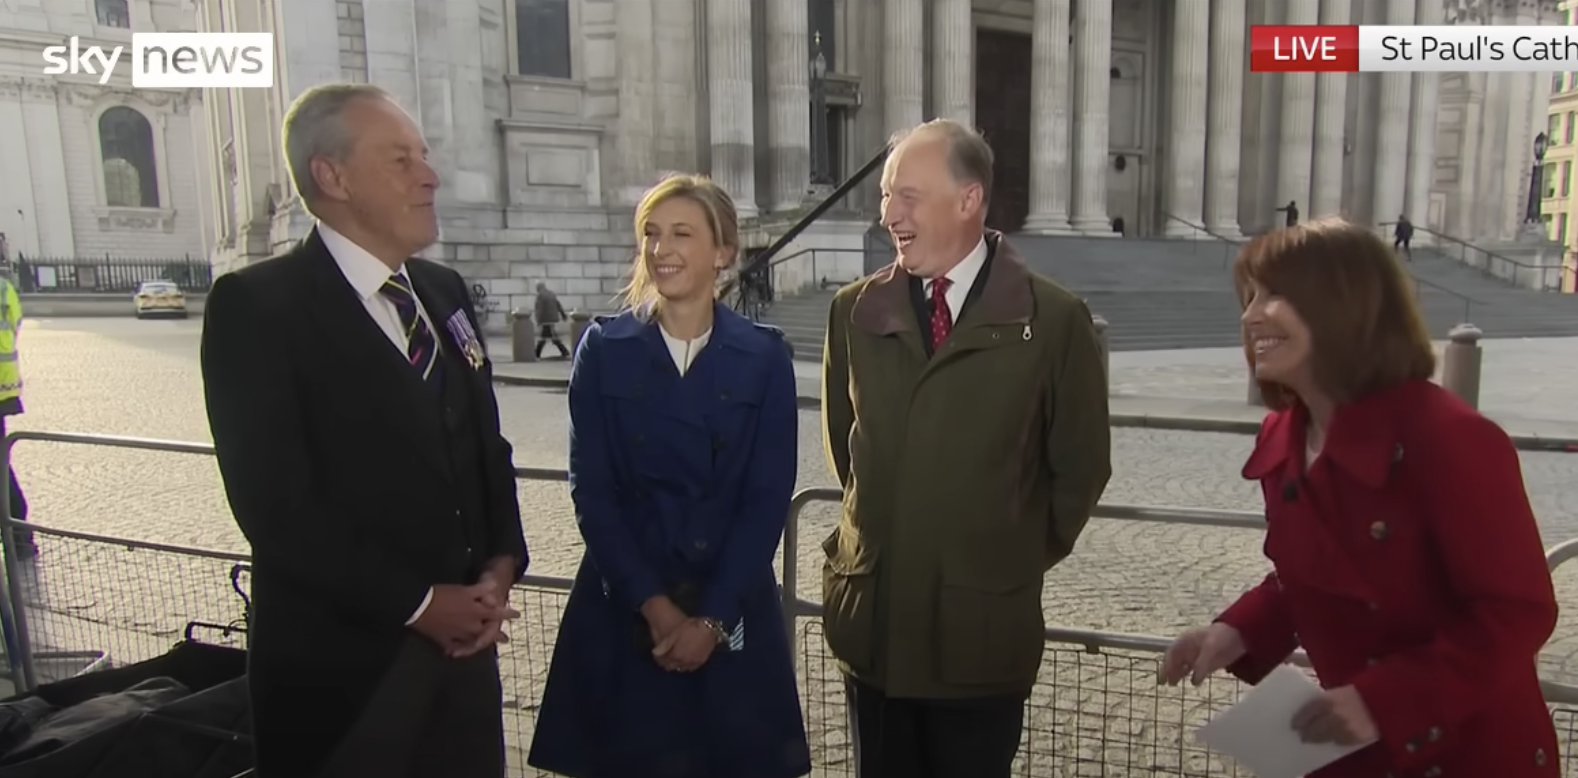 Richard standing with three other people on Sky News